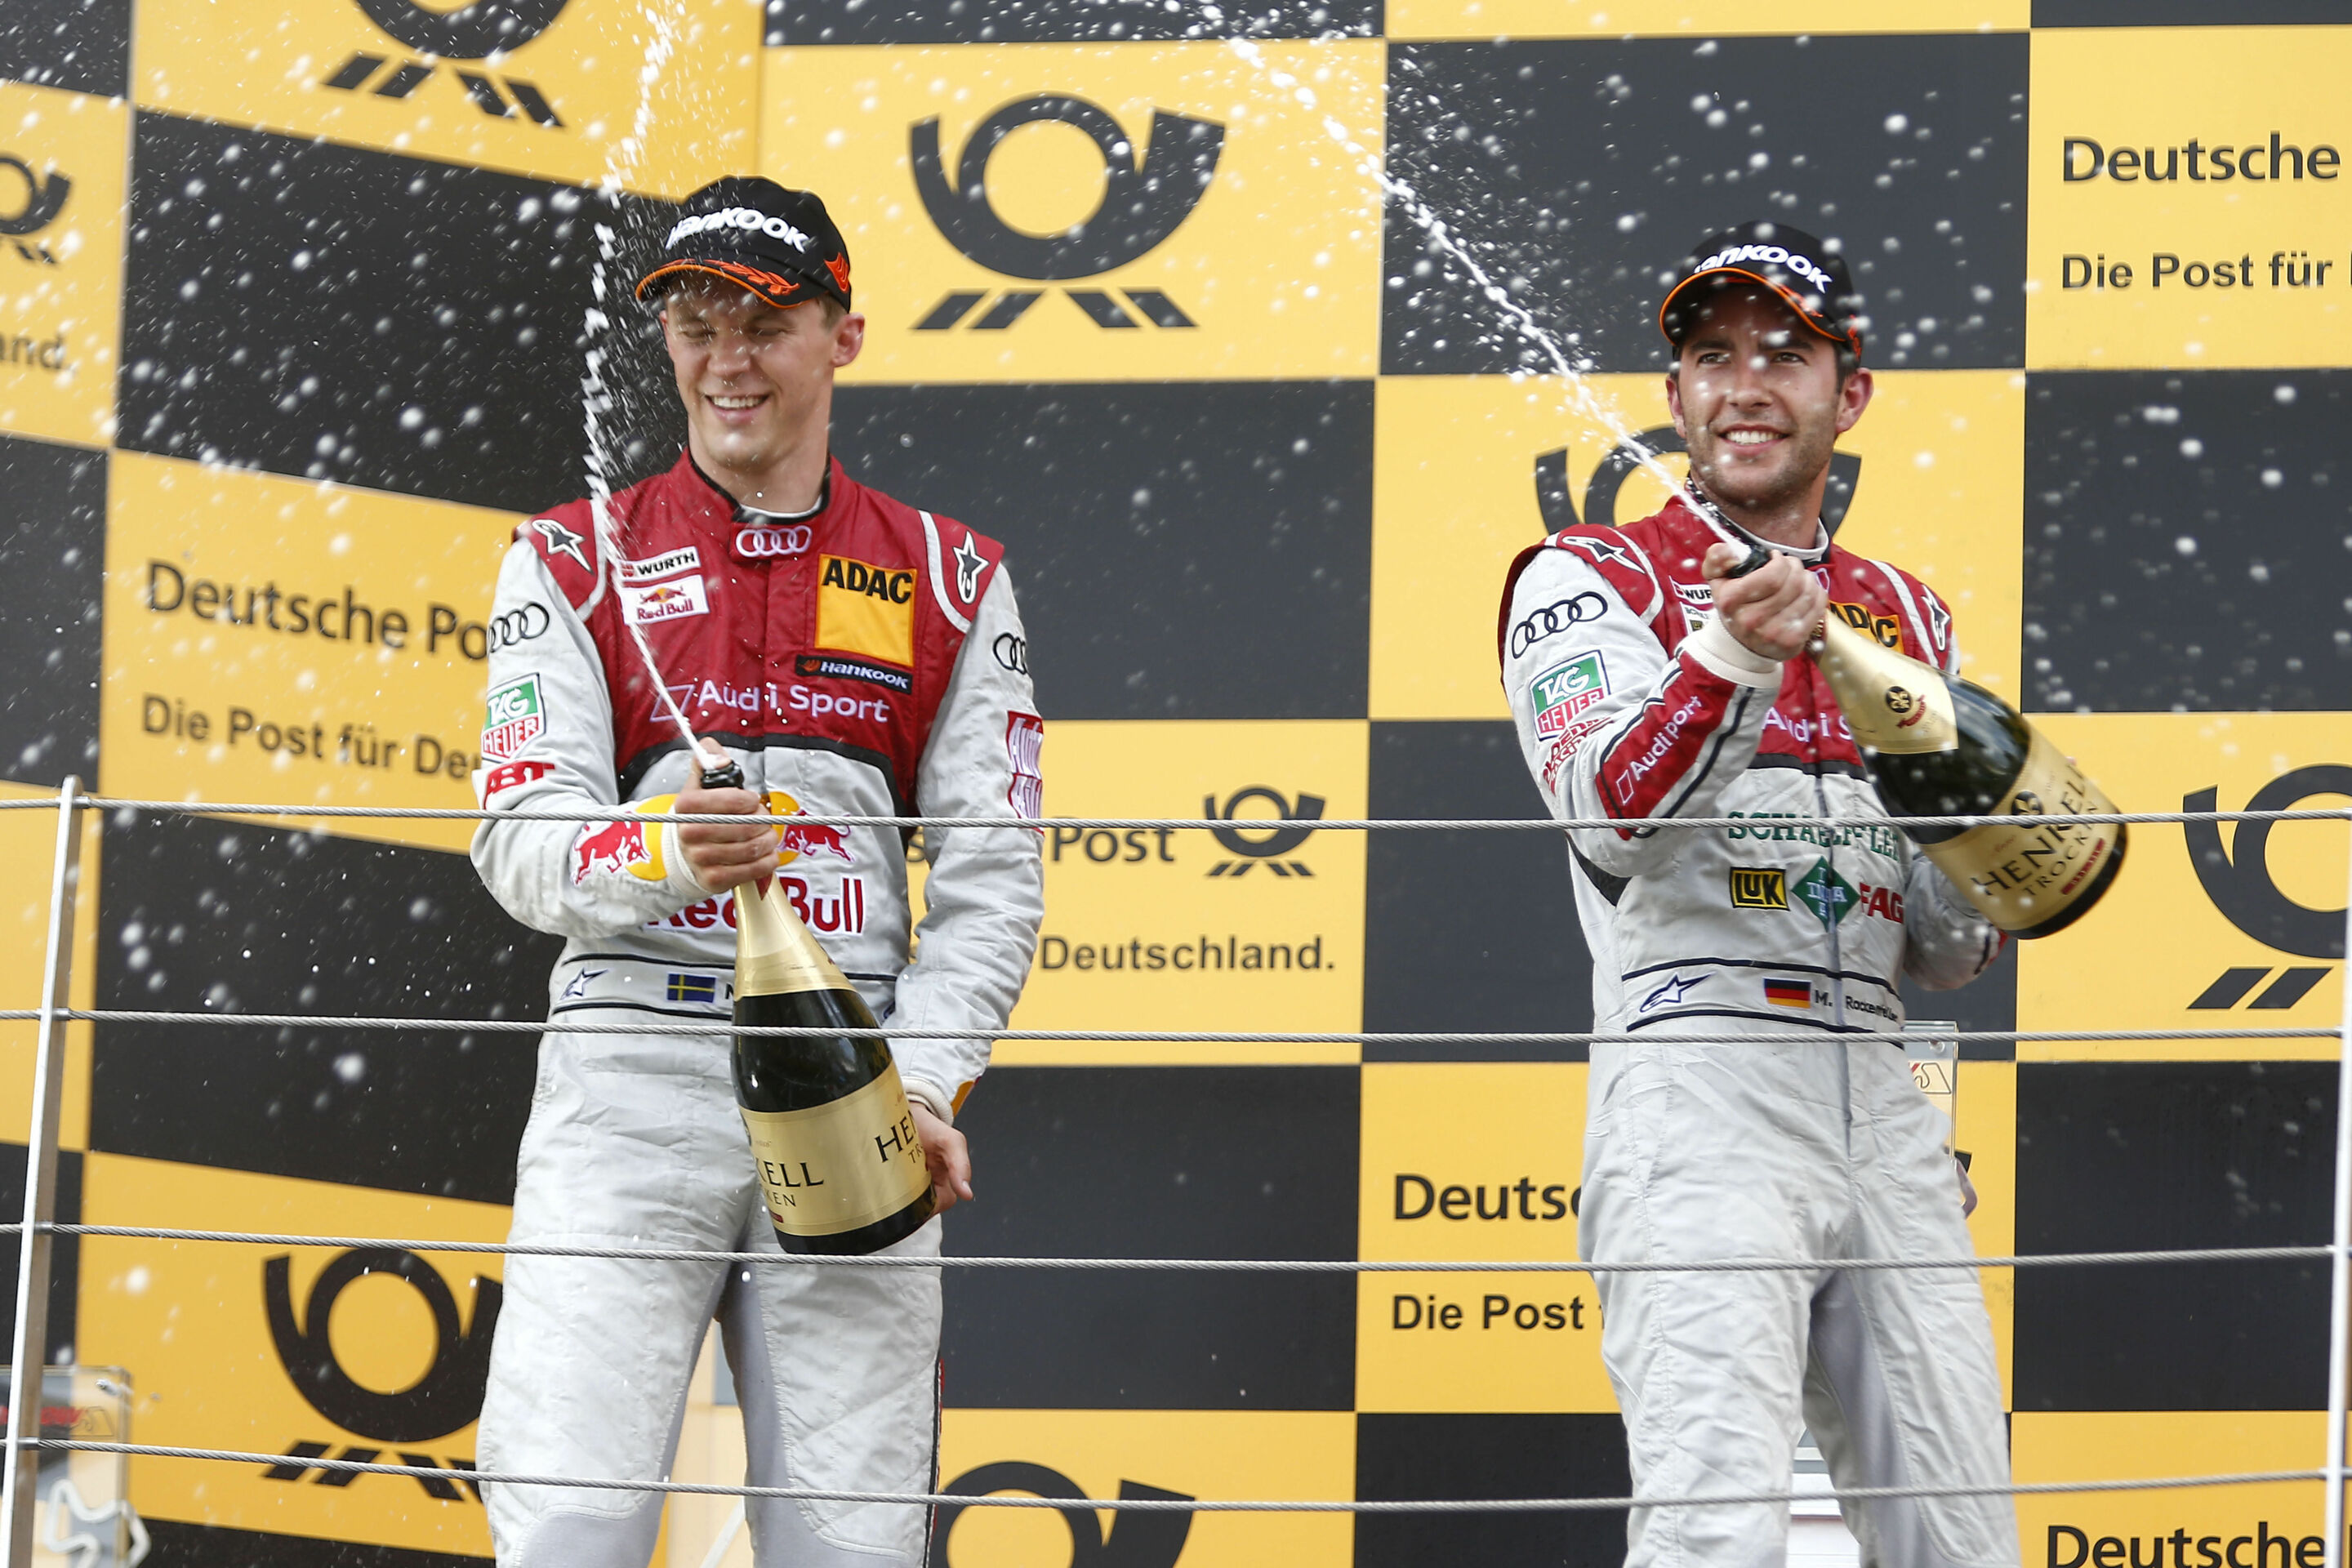 Audi takes both top spots on grid at Russian premiere